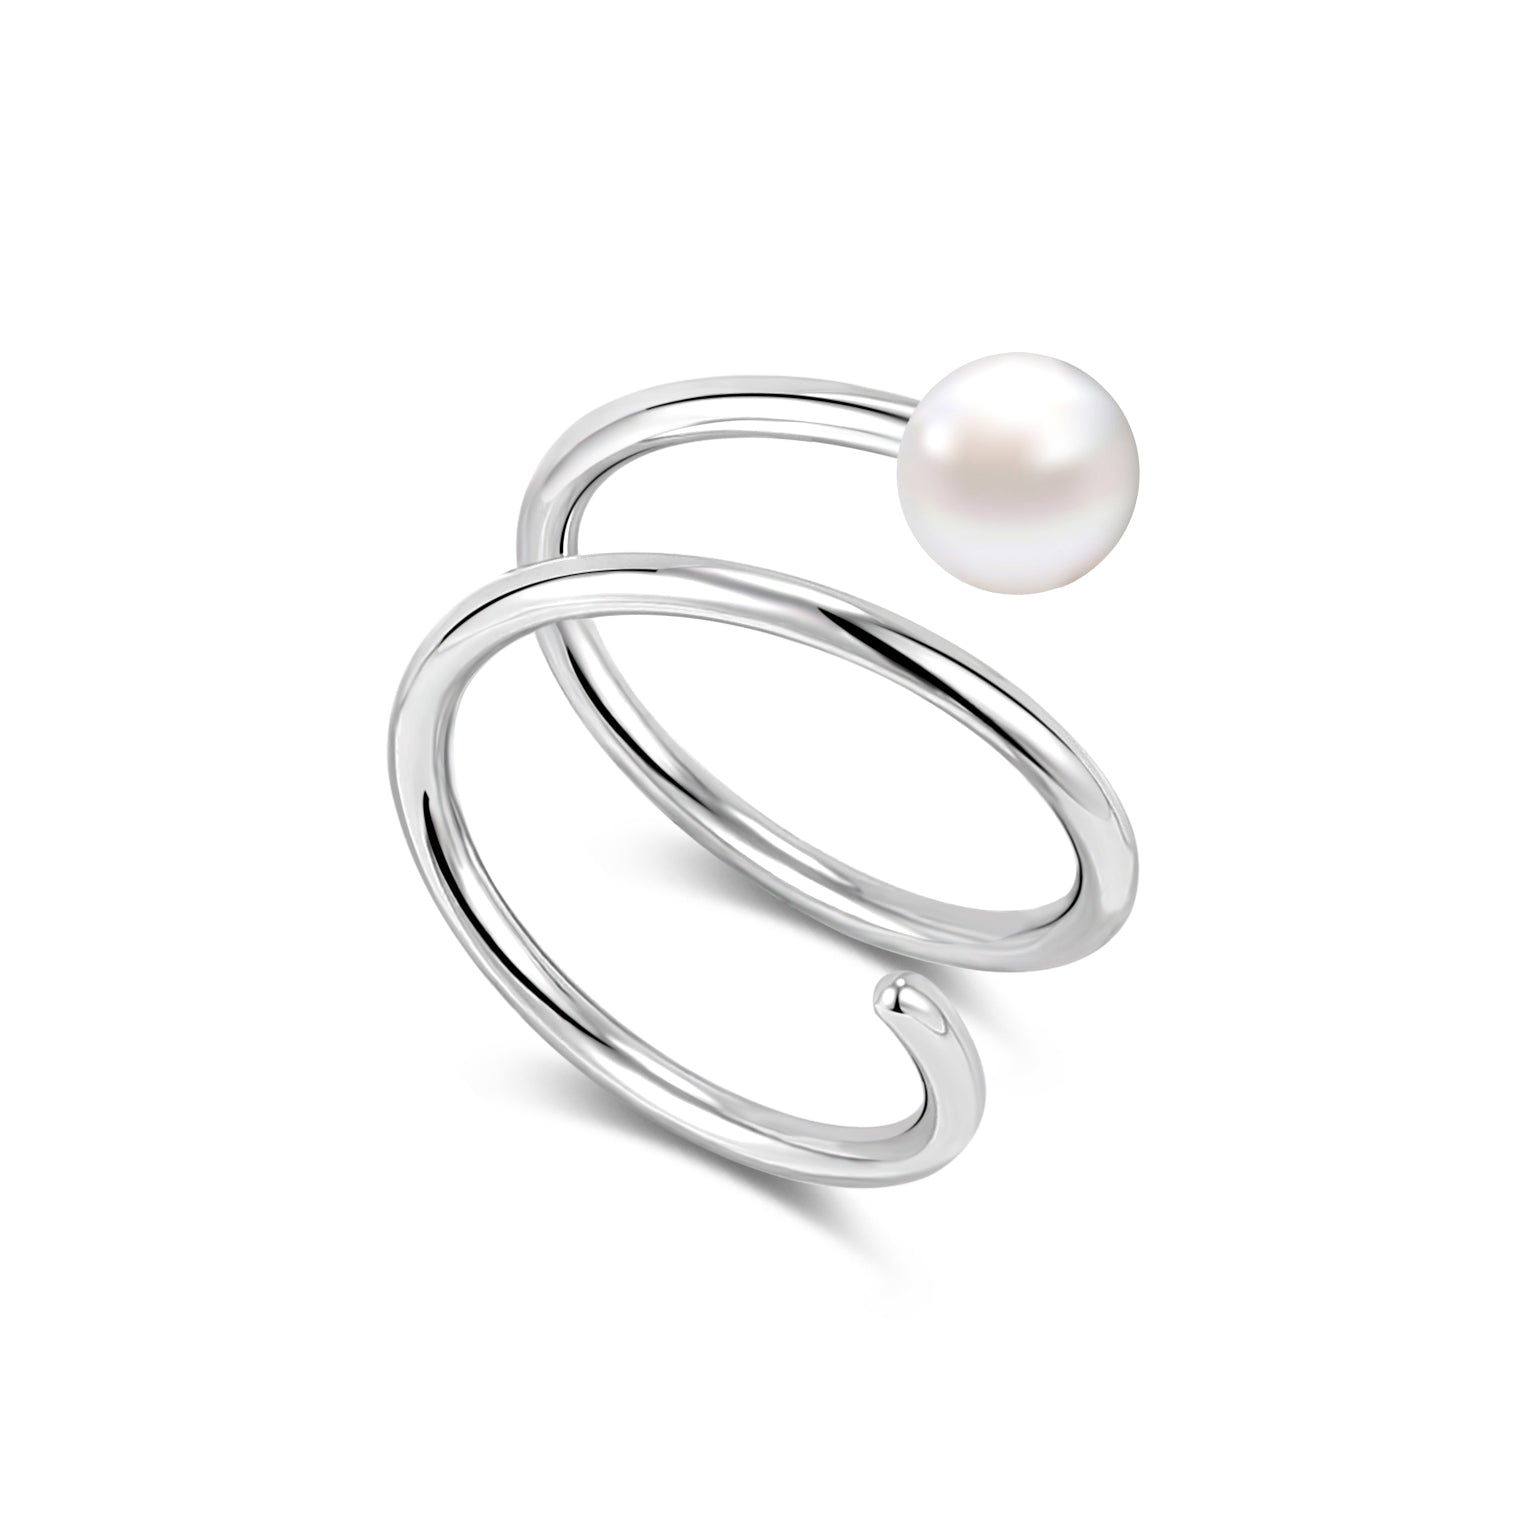 20G-White-Pearl-Nose-Rings-Double-Layered-Spiral-Nose-Piercing-Stainless-Steel-Nostril-Rings